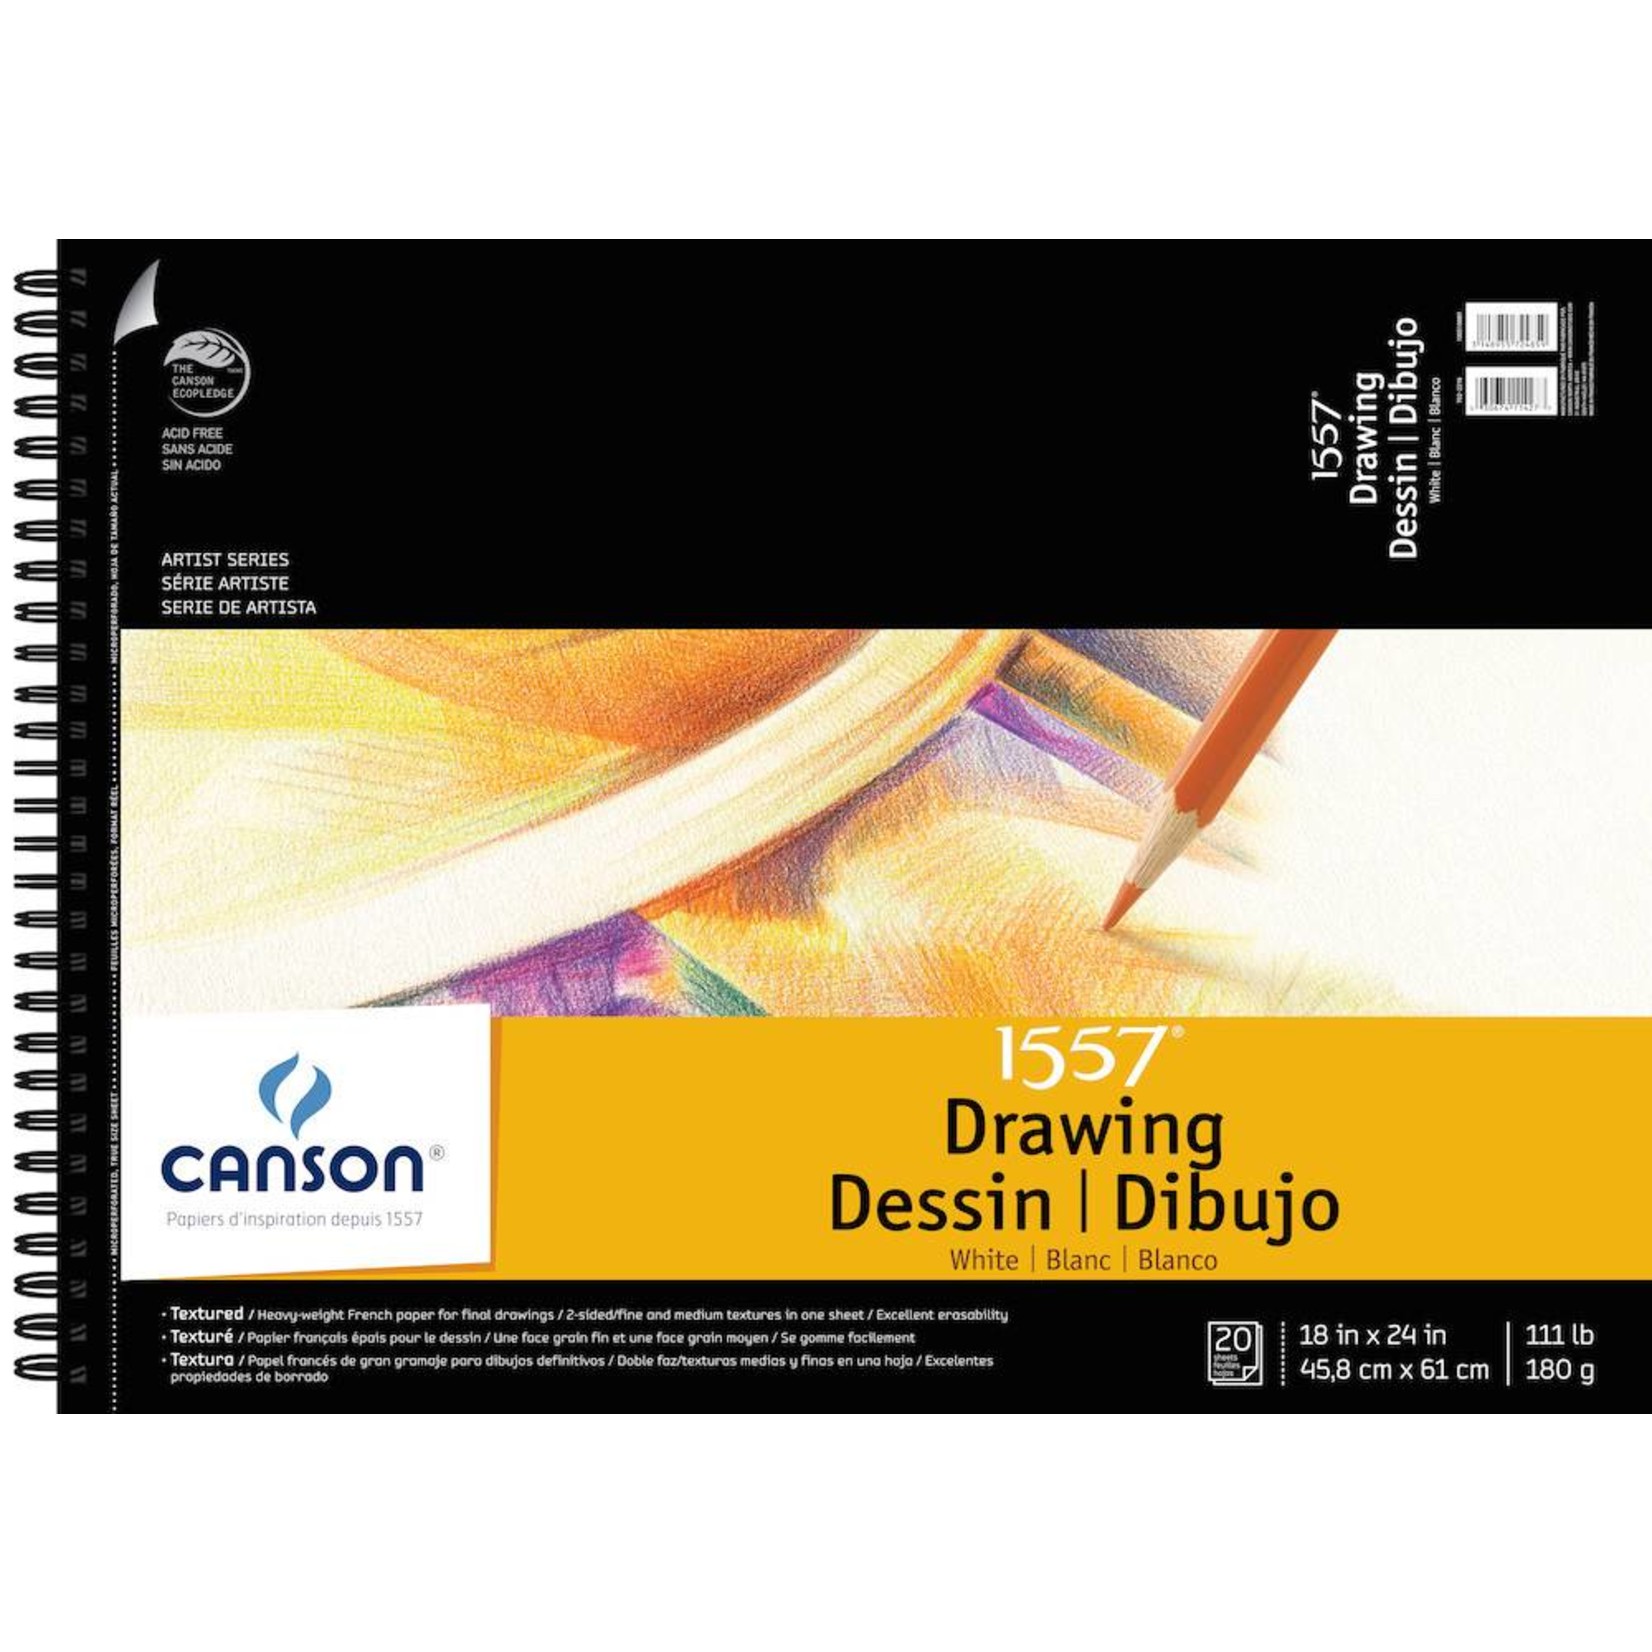 CANSON CANSON ARTIST SERIES C à GRAIN DRAWING PAD 18X24 SIDE COIL 20/SHT